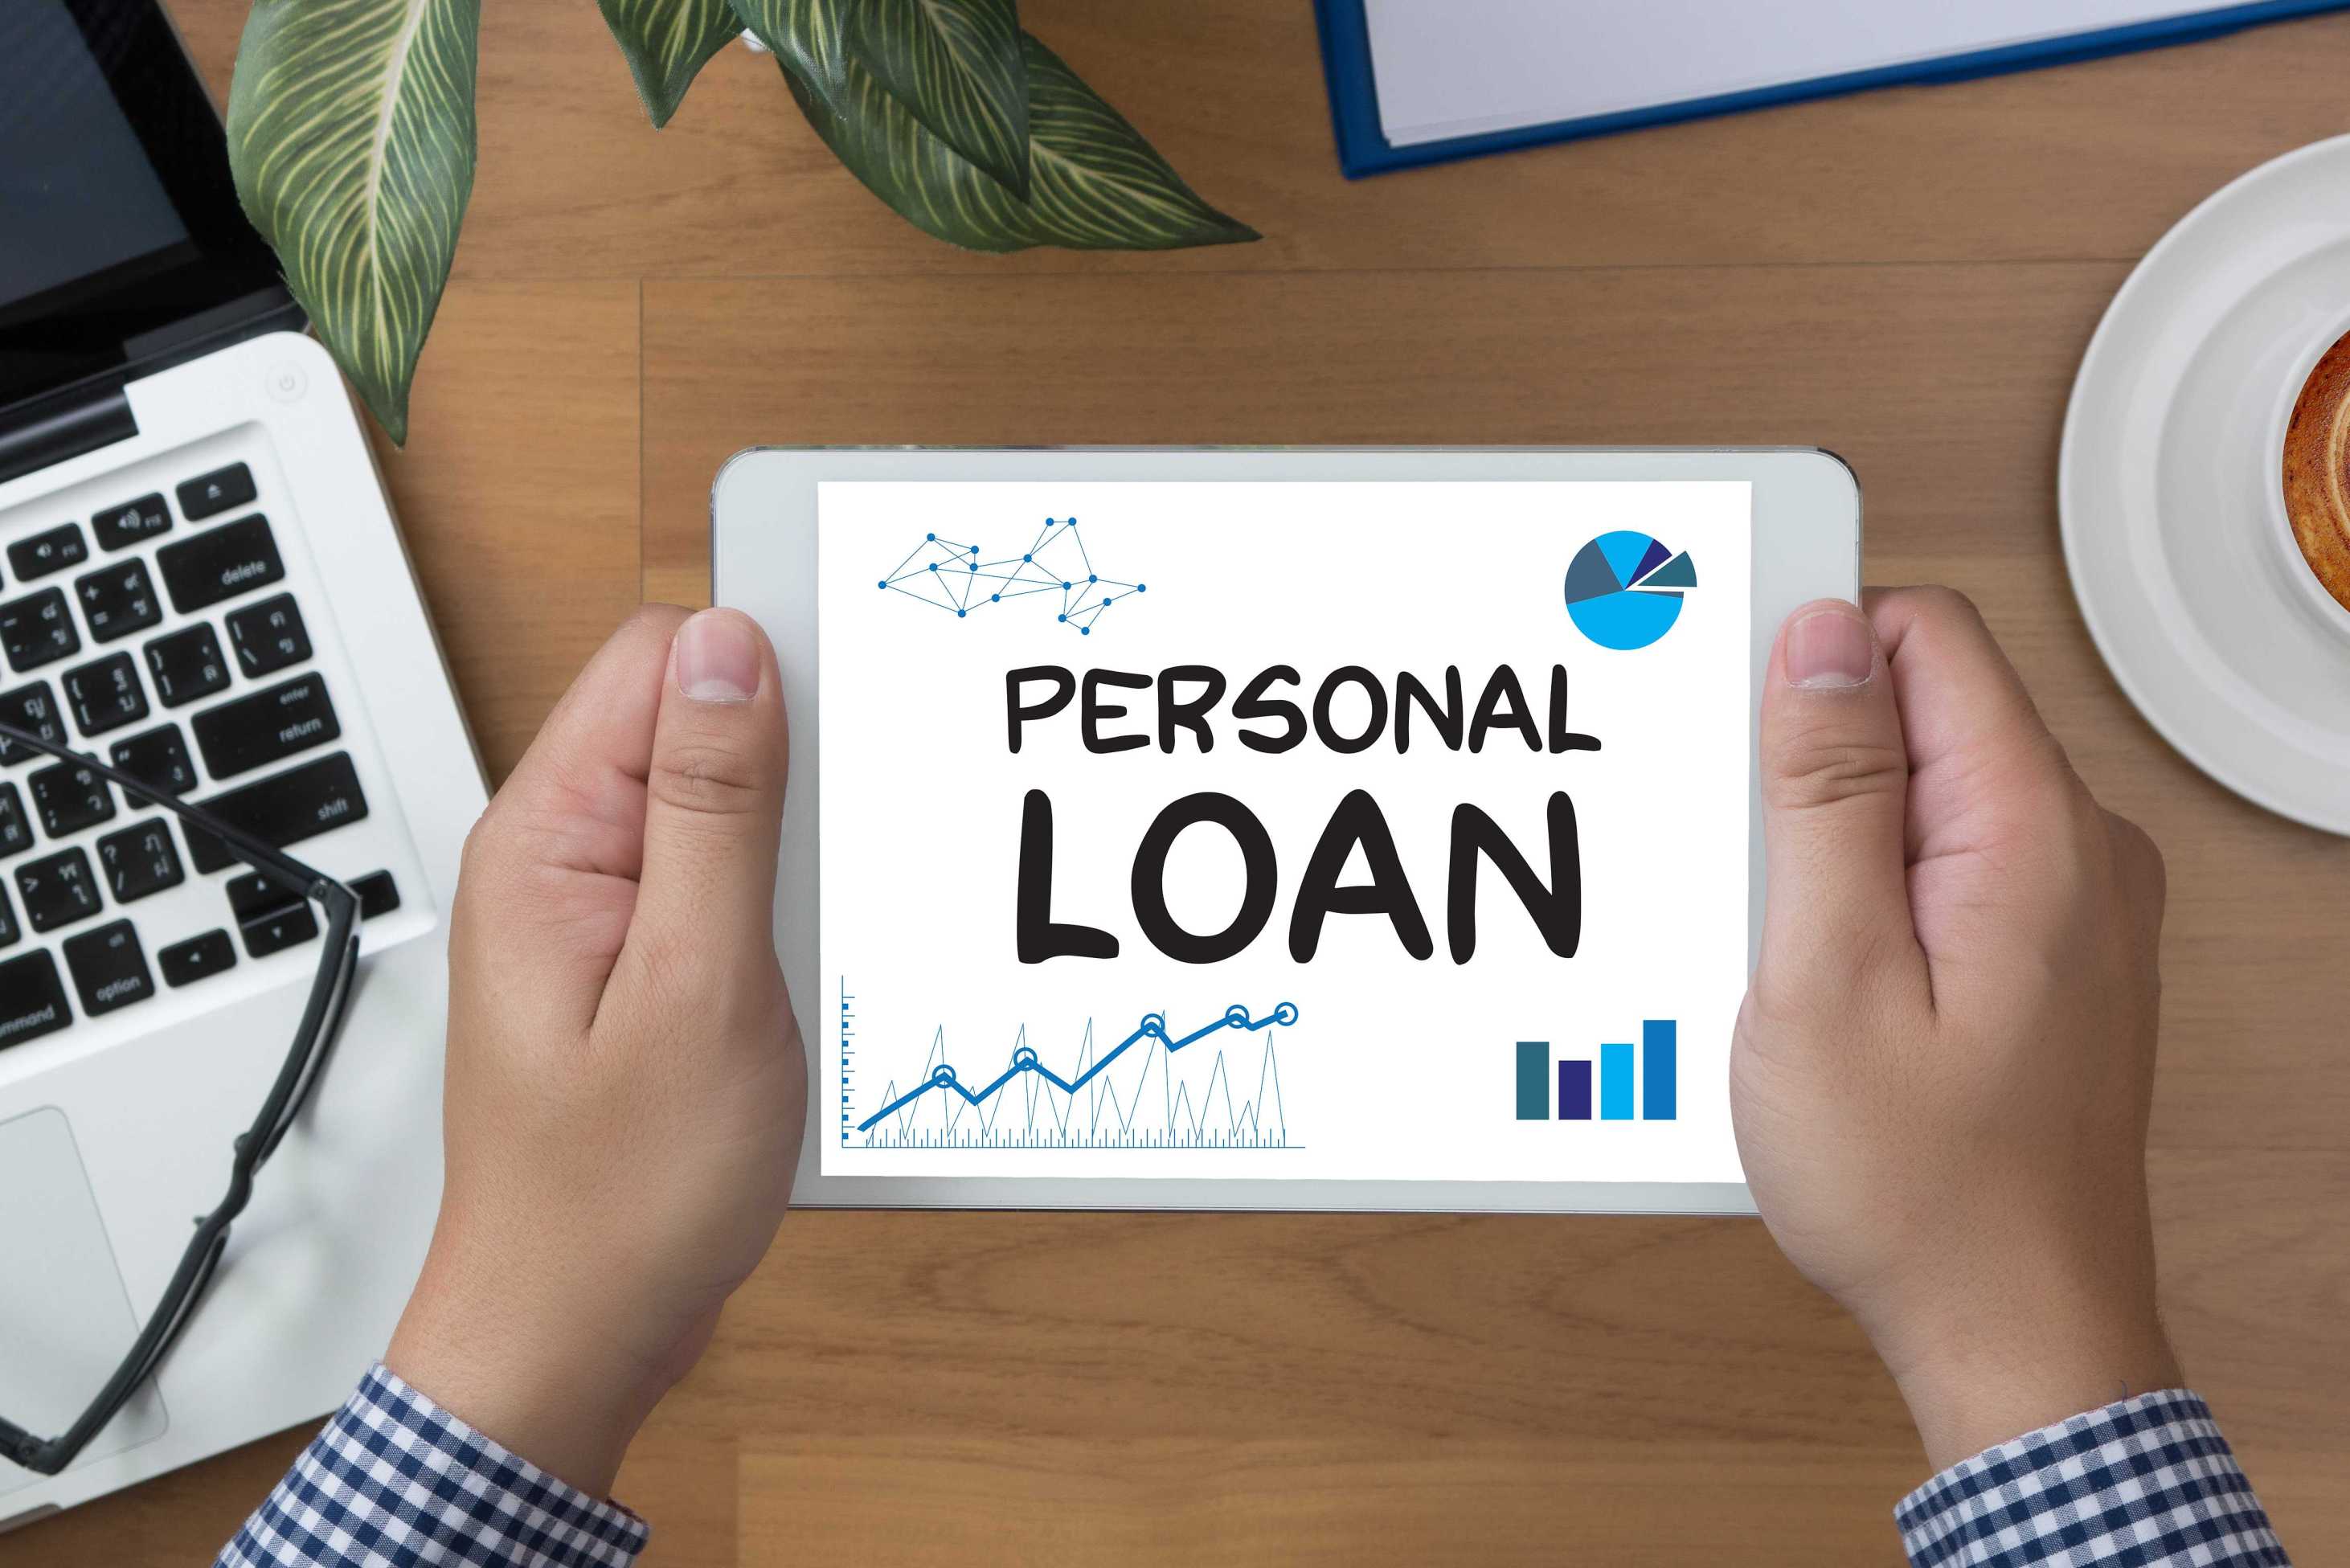 Personal Loans for the Festive Season: Yes or No?